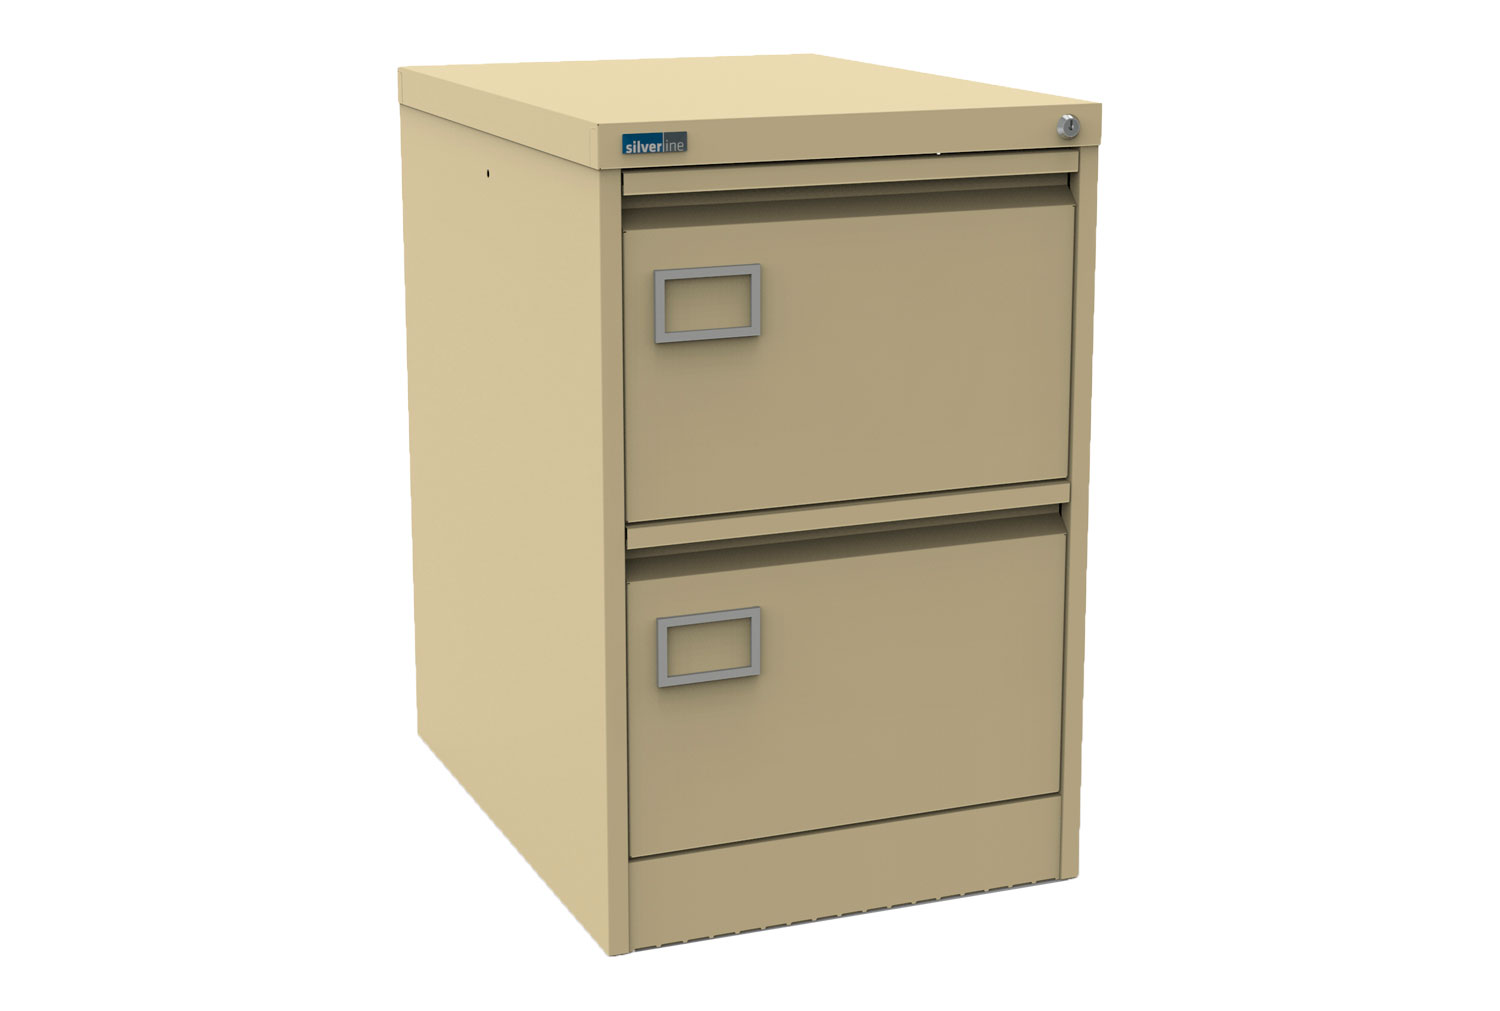 Silverline Executive 2 Drawer Filing Cabinets, 2 Drawer - 46wx62dx71h (cm), Beige